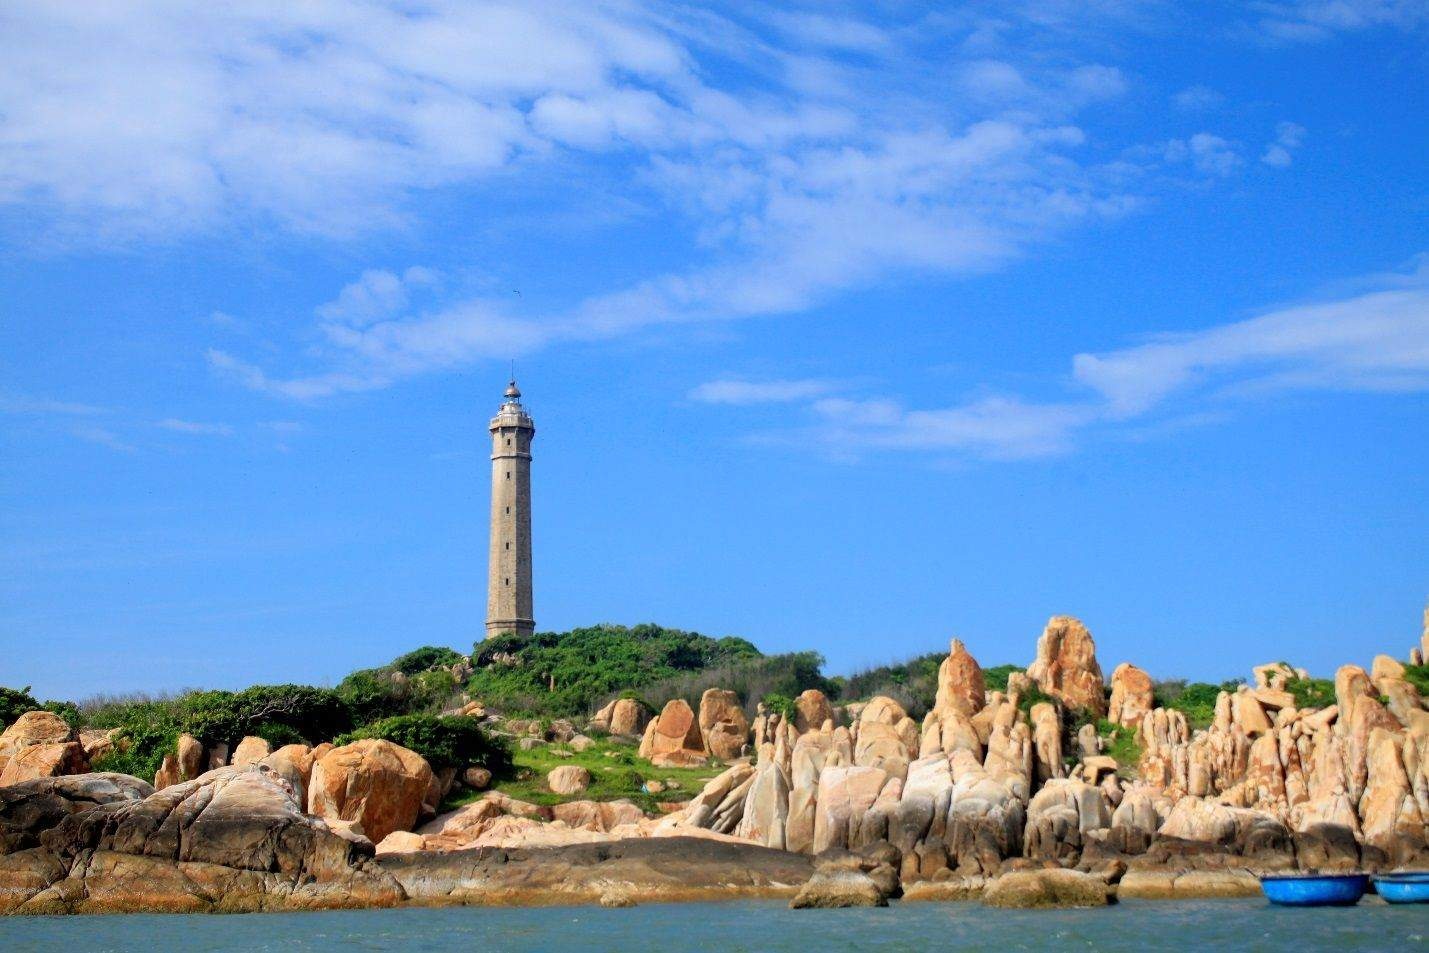 Phu Yen aims to grow tourism over 14 per cent per year